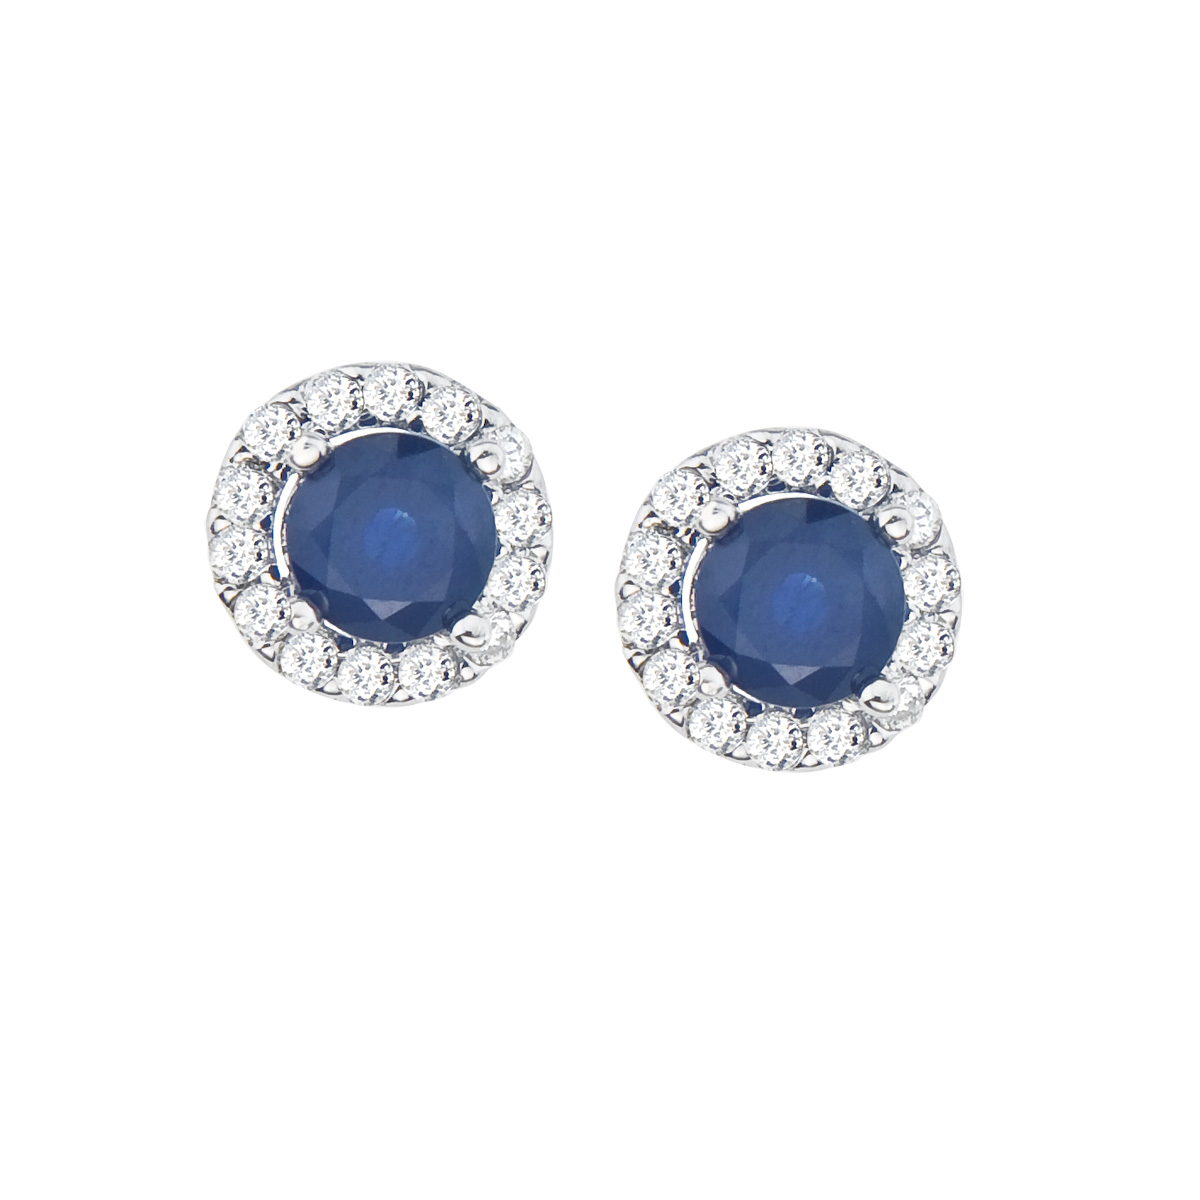 JCX2090: Classicly beautiful halo earrings with bright 5 mm sapphire center stones surrounded by .34 total ct diamonds set in 14k white gold.